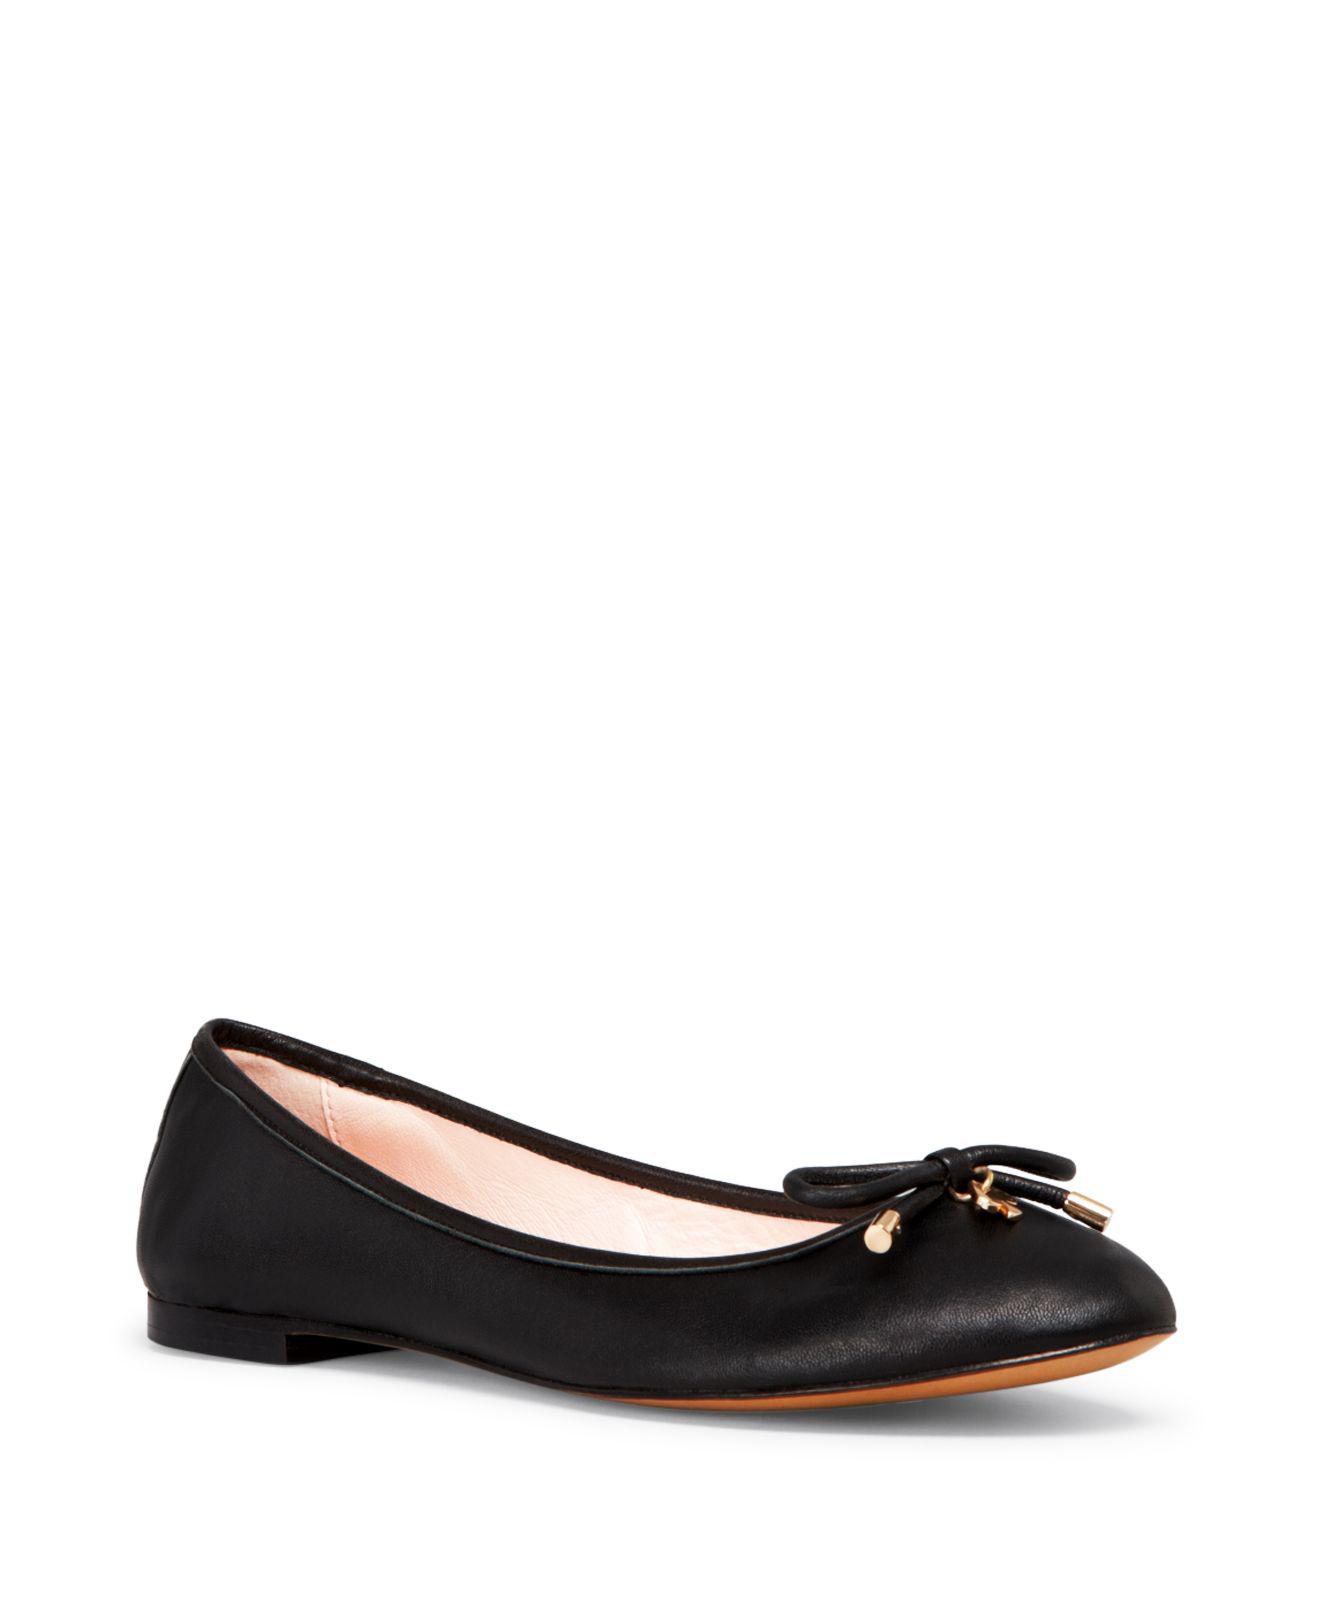 Lyst - Kate Spade New York Willa Bow Ballet Flats in Black